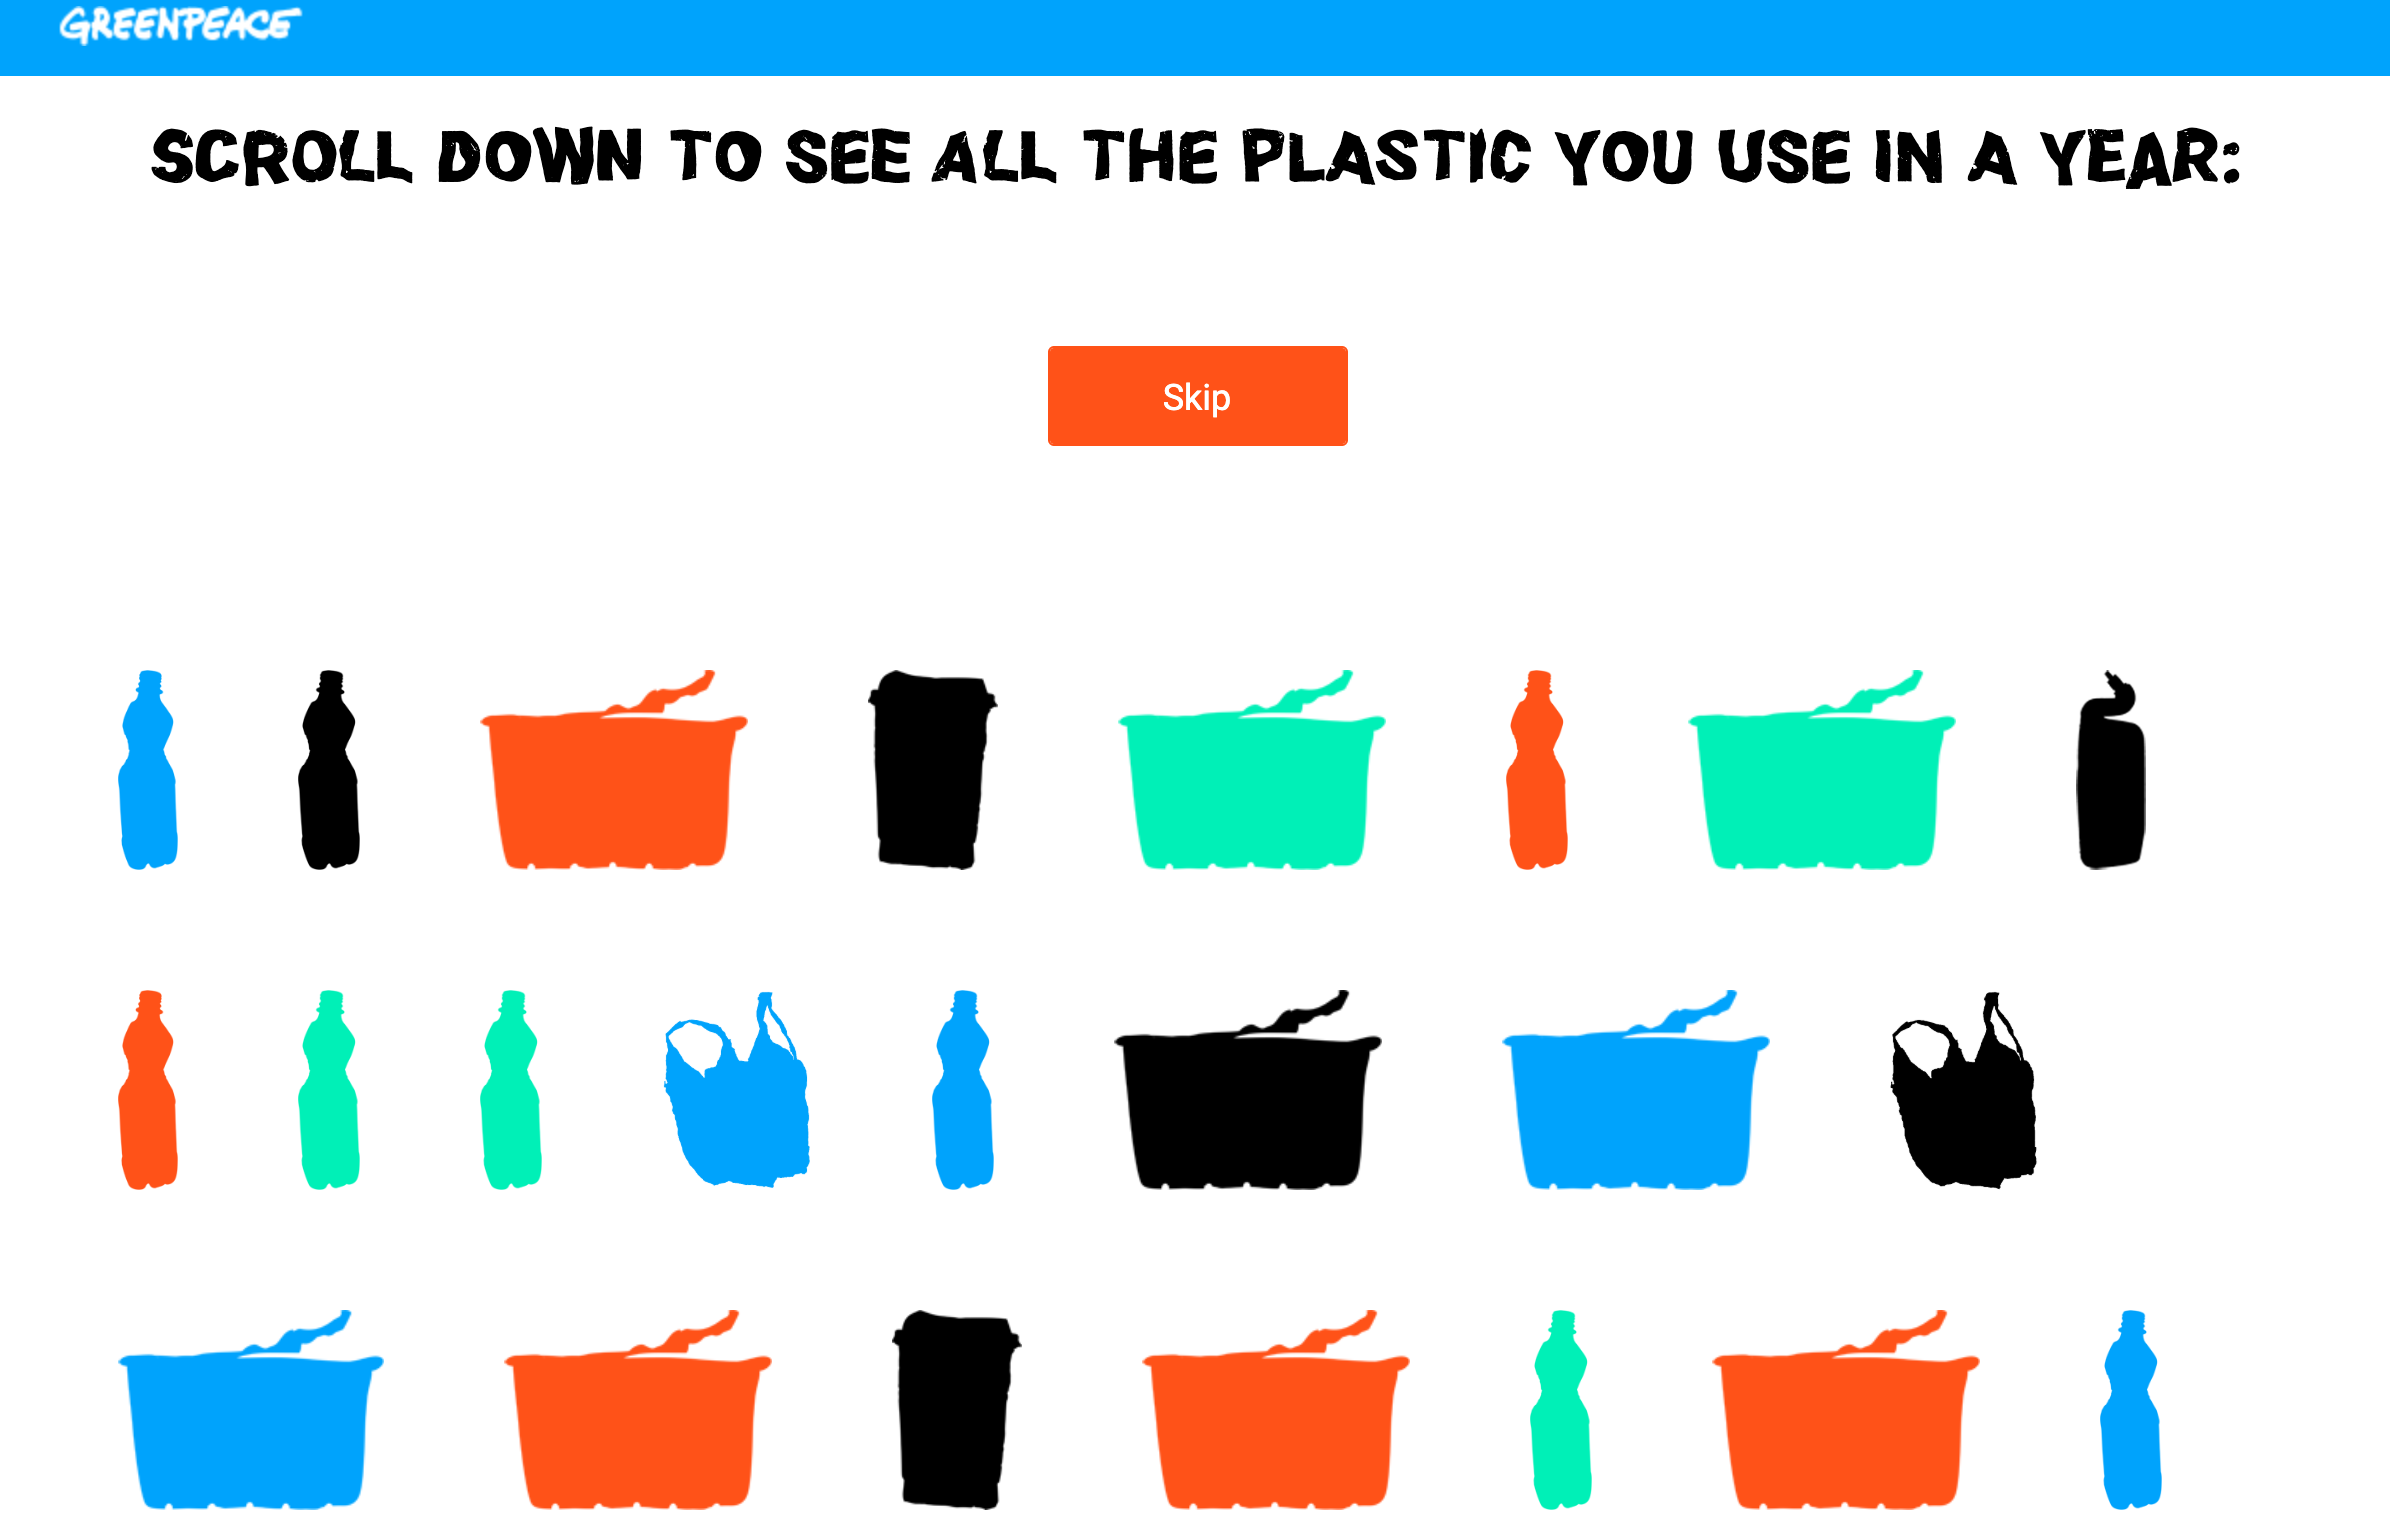 A visual representation of the plastic used based on answers to the quiz